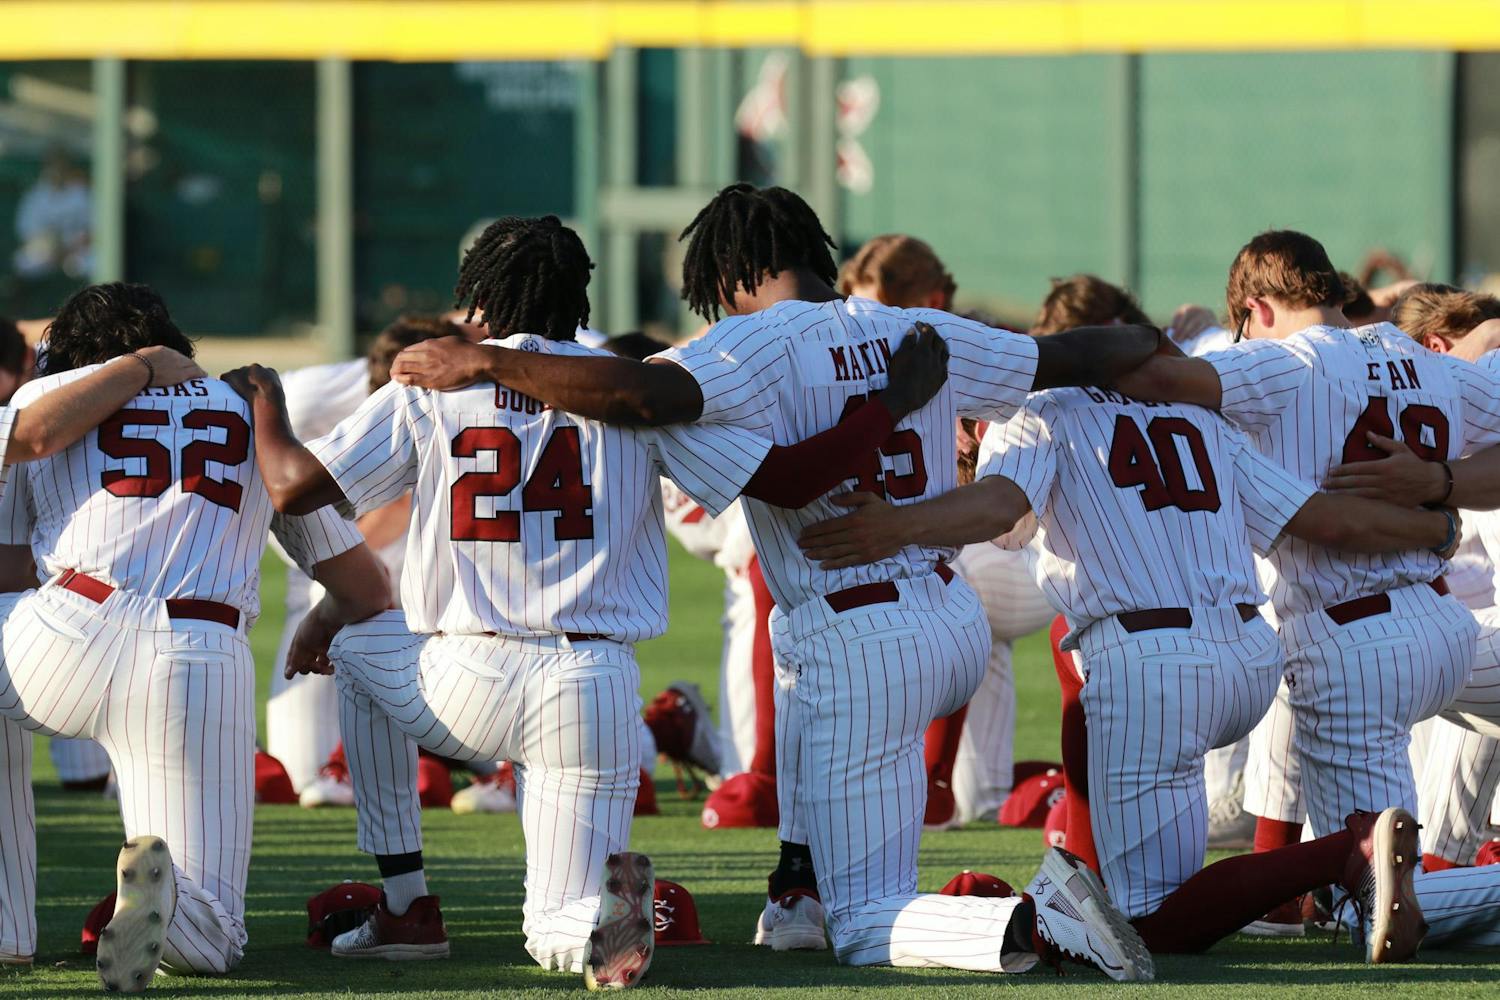 The No. 20 South Carolina baseball team lost its weekend series against No. 2 Arkansas 2-1, bringing its record to 27-13 on the season. While the 91ýƬ were able to pull off a 6-3 win on Saturday afternoon, it fell to the Razorbacks on Friday and Saturday night. Next up, South Carolina will face No. 3 Kentucky on Friday, April 26, 2024, at 7 p.m. This will be the first of a three-game series.